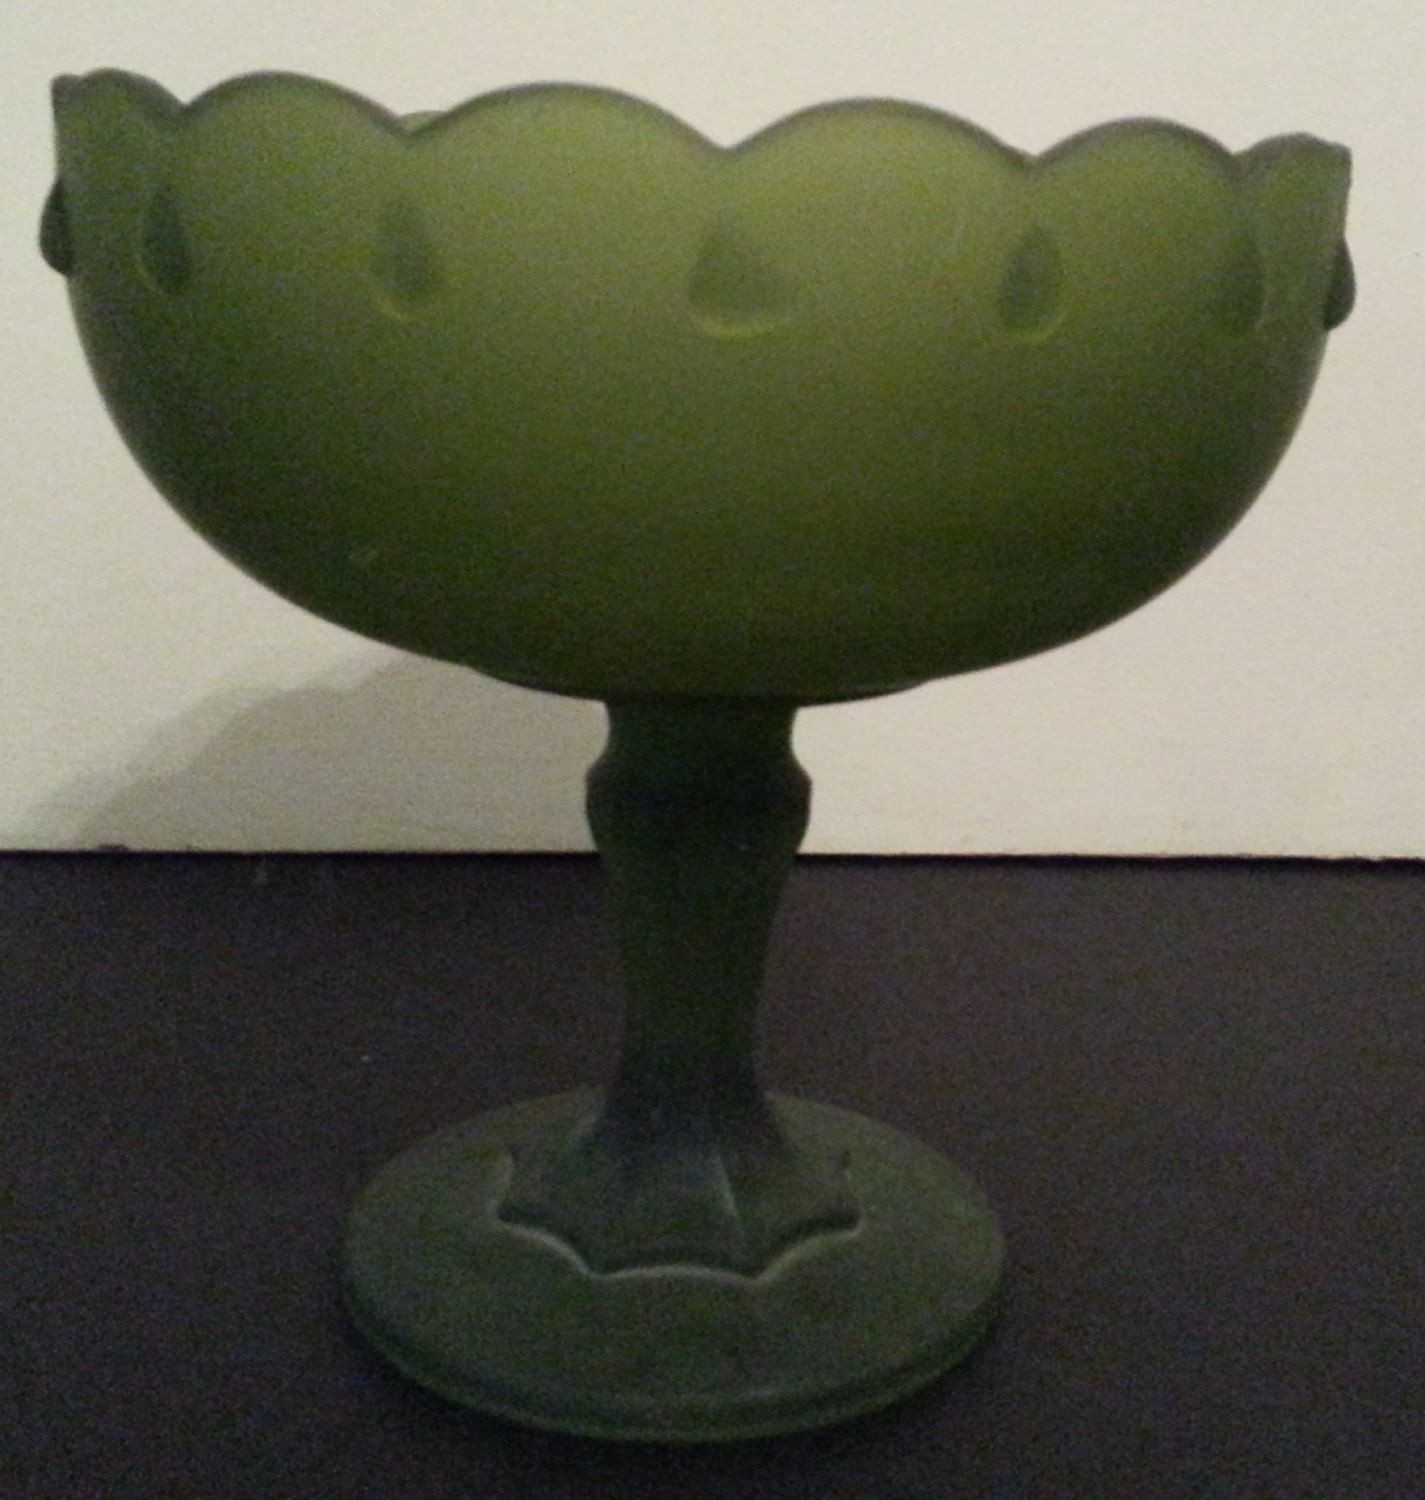 vintage small green glass vase of vintage indiana glass frosted green satin mist teardrop compote regarding vintage indiana glass frosted green satin mist teardrop compote 1003 by cherishedagain on etsy